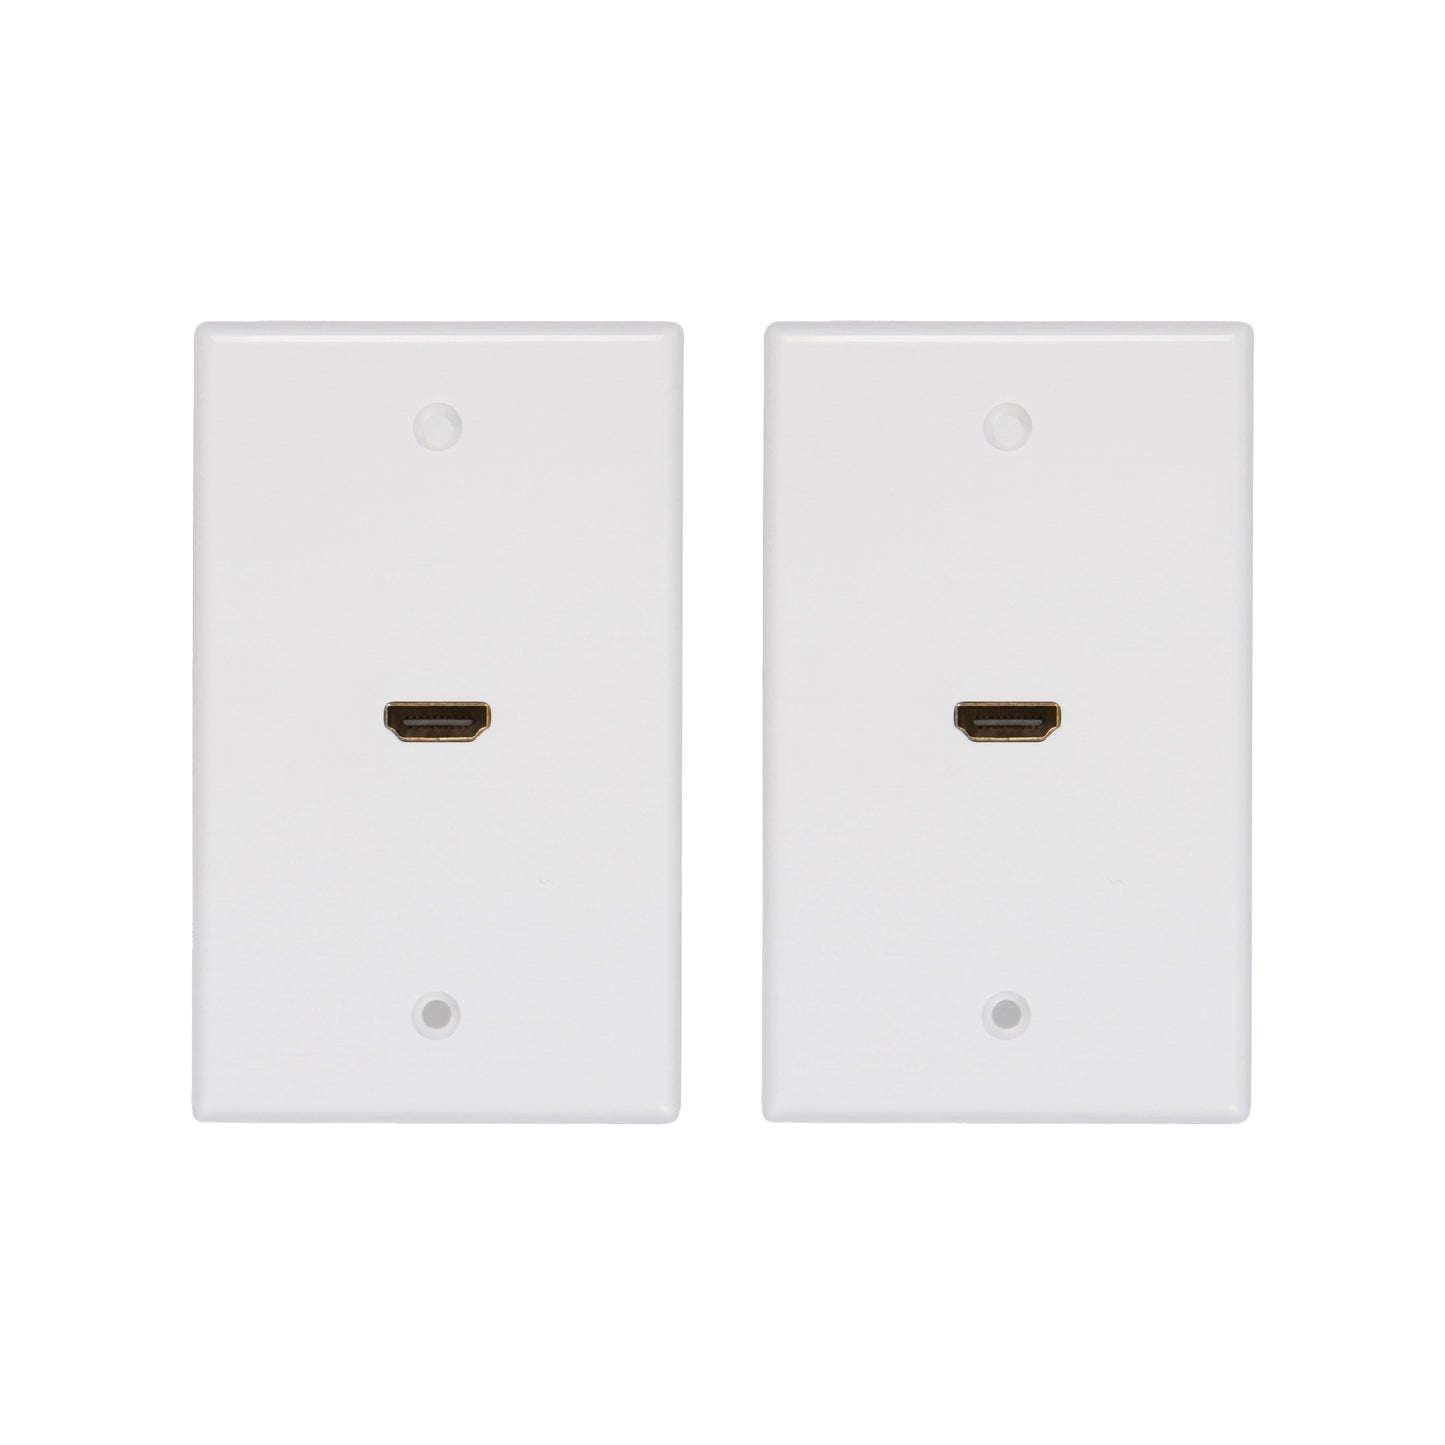 1 Port HDMI Wall Plate [UL Listed] Insert Built-in Hi-Speed HDMI Cable with Ethernet- Decora Style Jack/Plug for Outlet Port (White 1 Port) - Milena International Inc